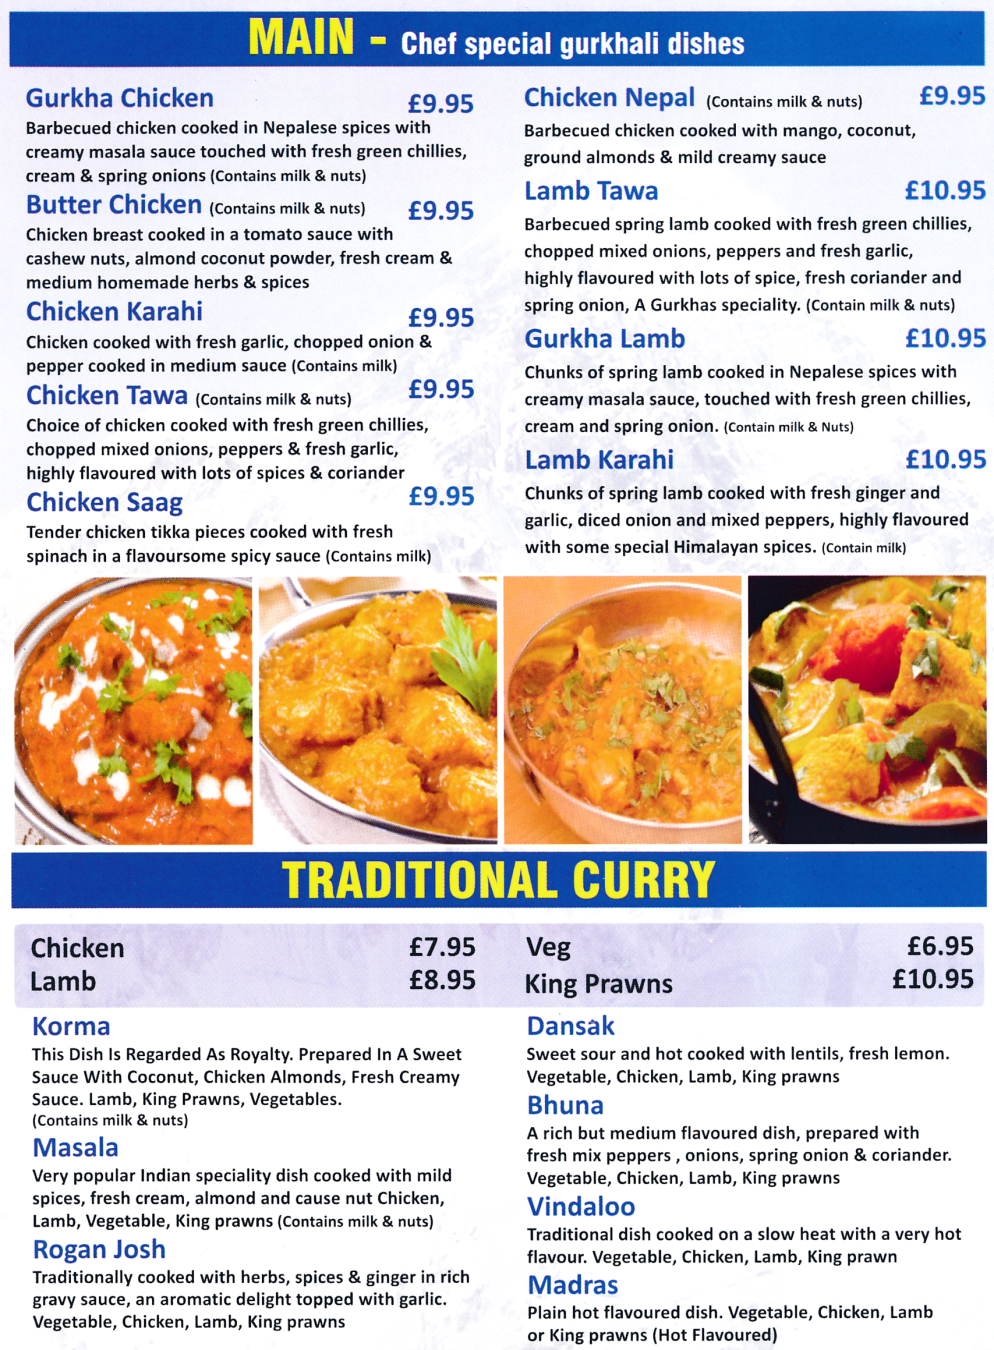 Menu for Gurkha Express Nepalese and Indian cuisine restaurant, takeaway and delivery in Beeston